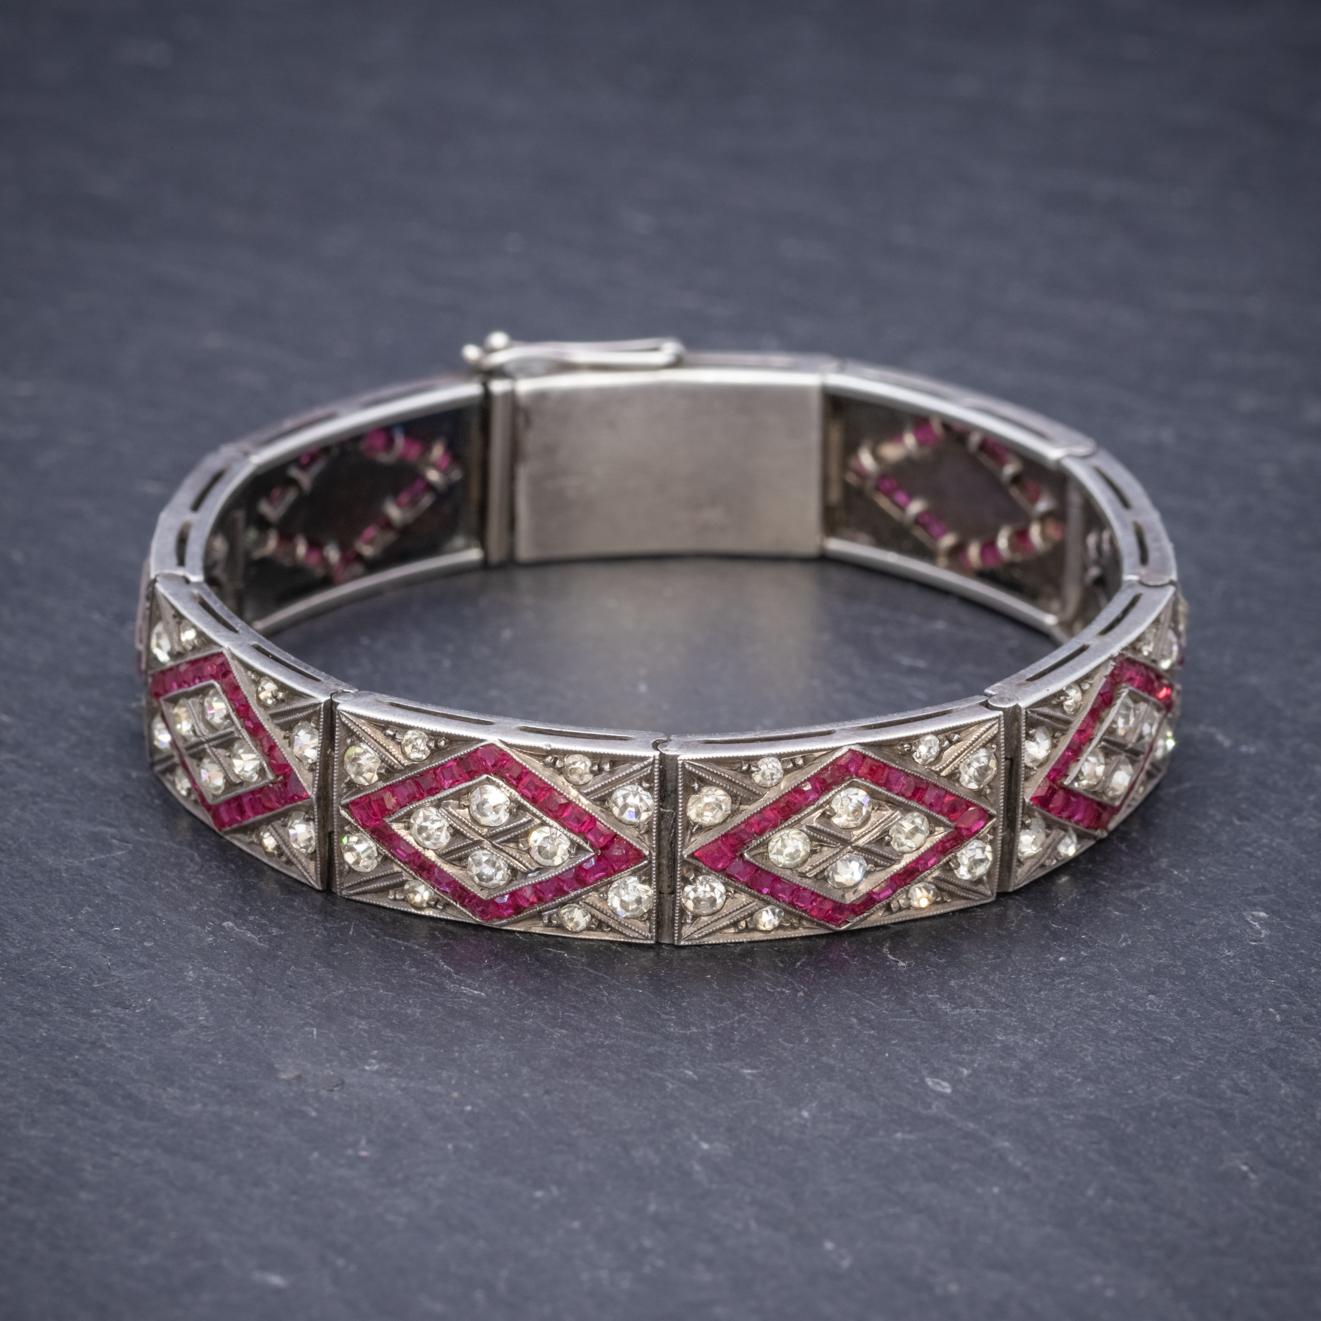 A stunning articulated Art Deco bracelet decorated with sparkling red and white Paste Stones which are set out in a lovely patterned design and together resemble Rubies and Diamonds. 

The piece is substantial all modelled in Silver with secure box